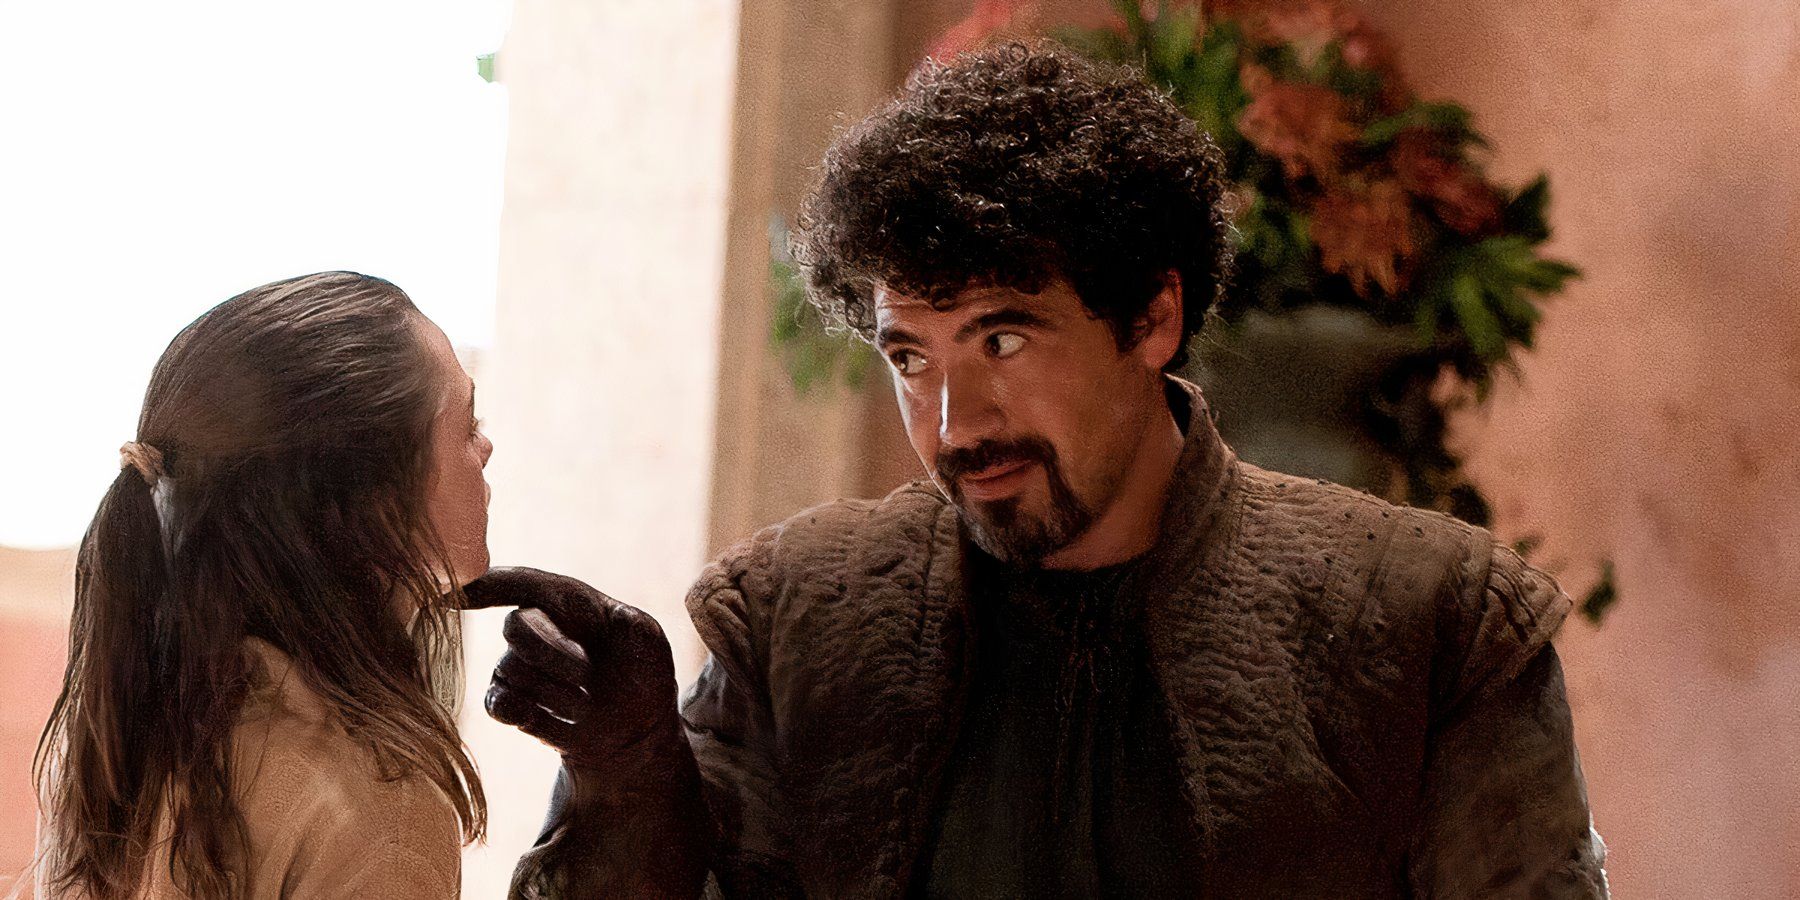 Arya Stark with her teacher Syrio Forel in Game of Thrones